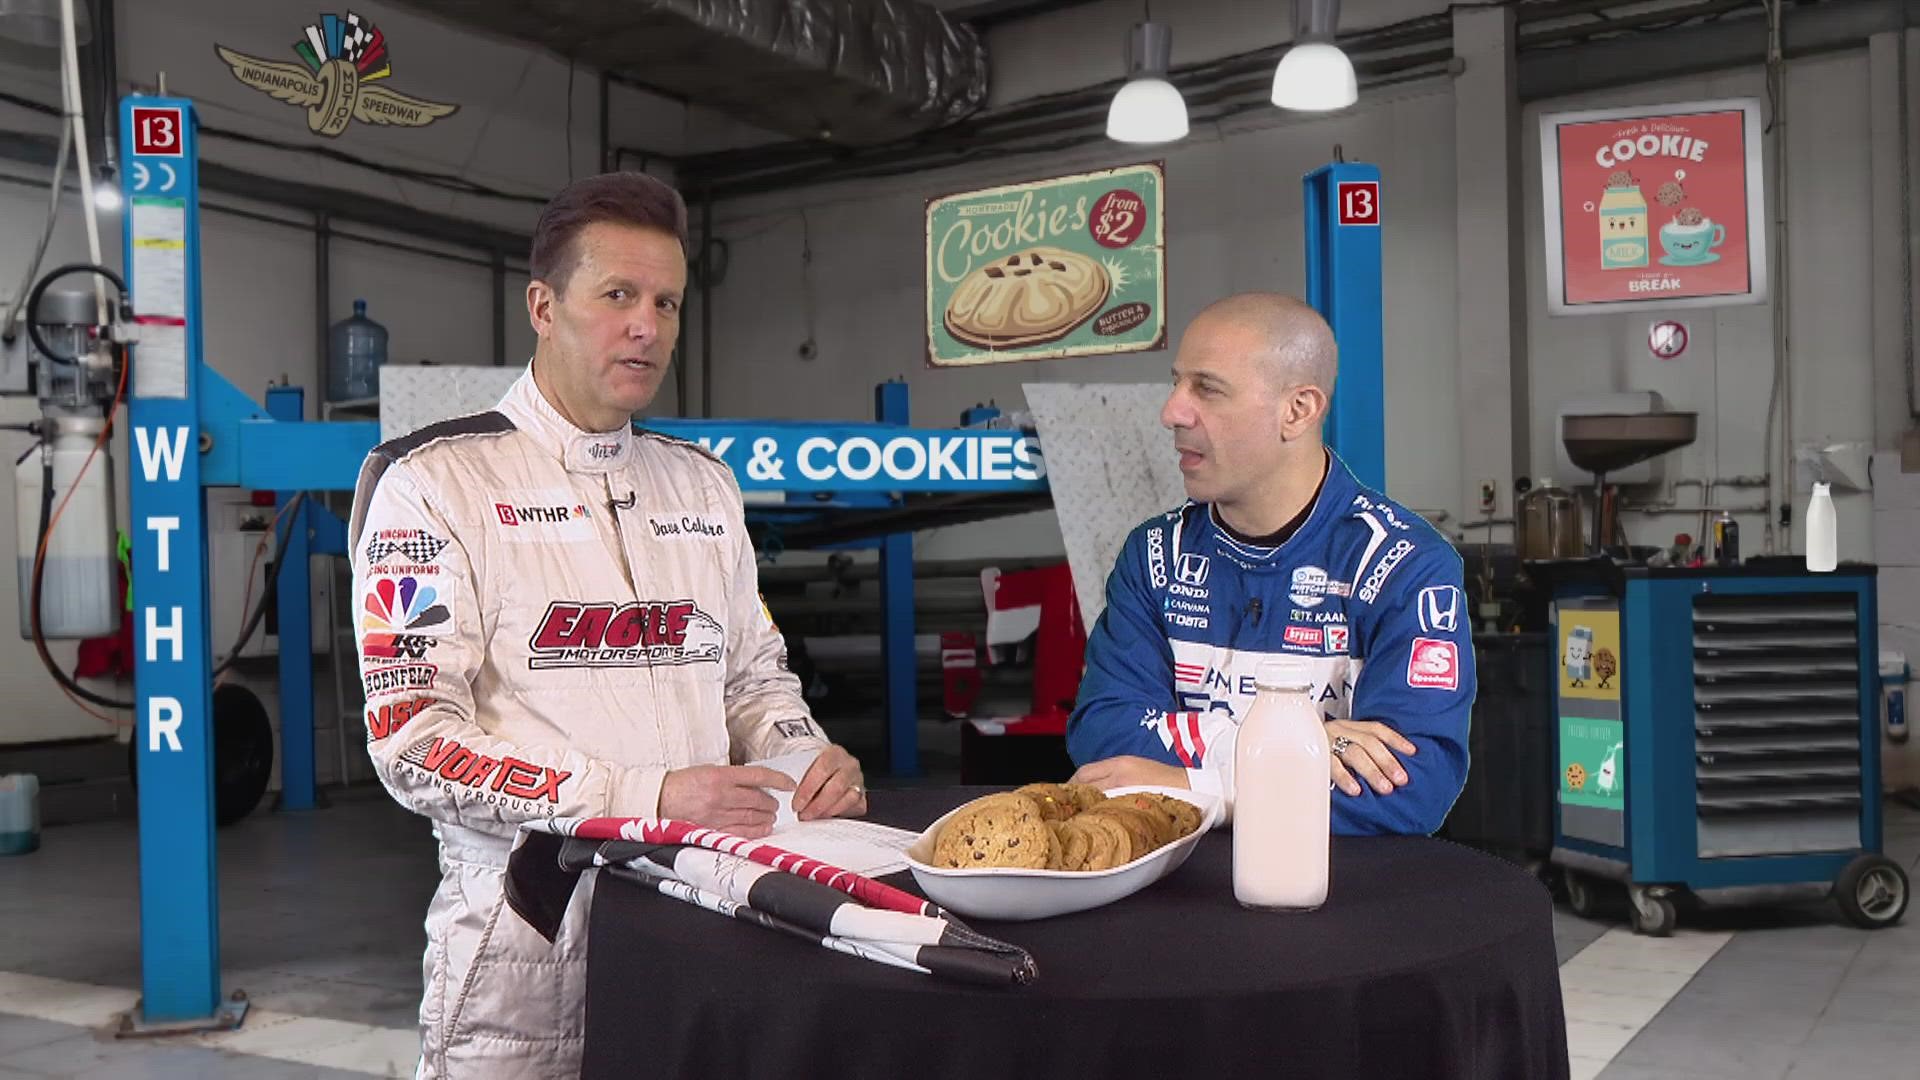 Dave Calabro shares a glass of milk and cookies with IndyCar drivers and asks them the hard hitting questions.